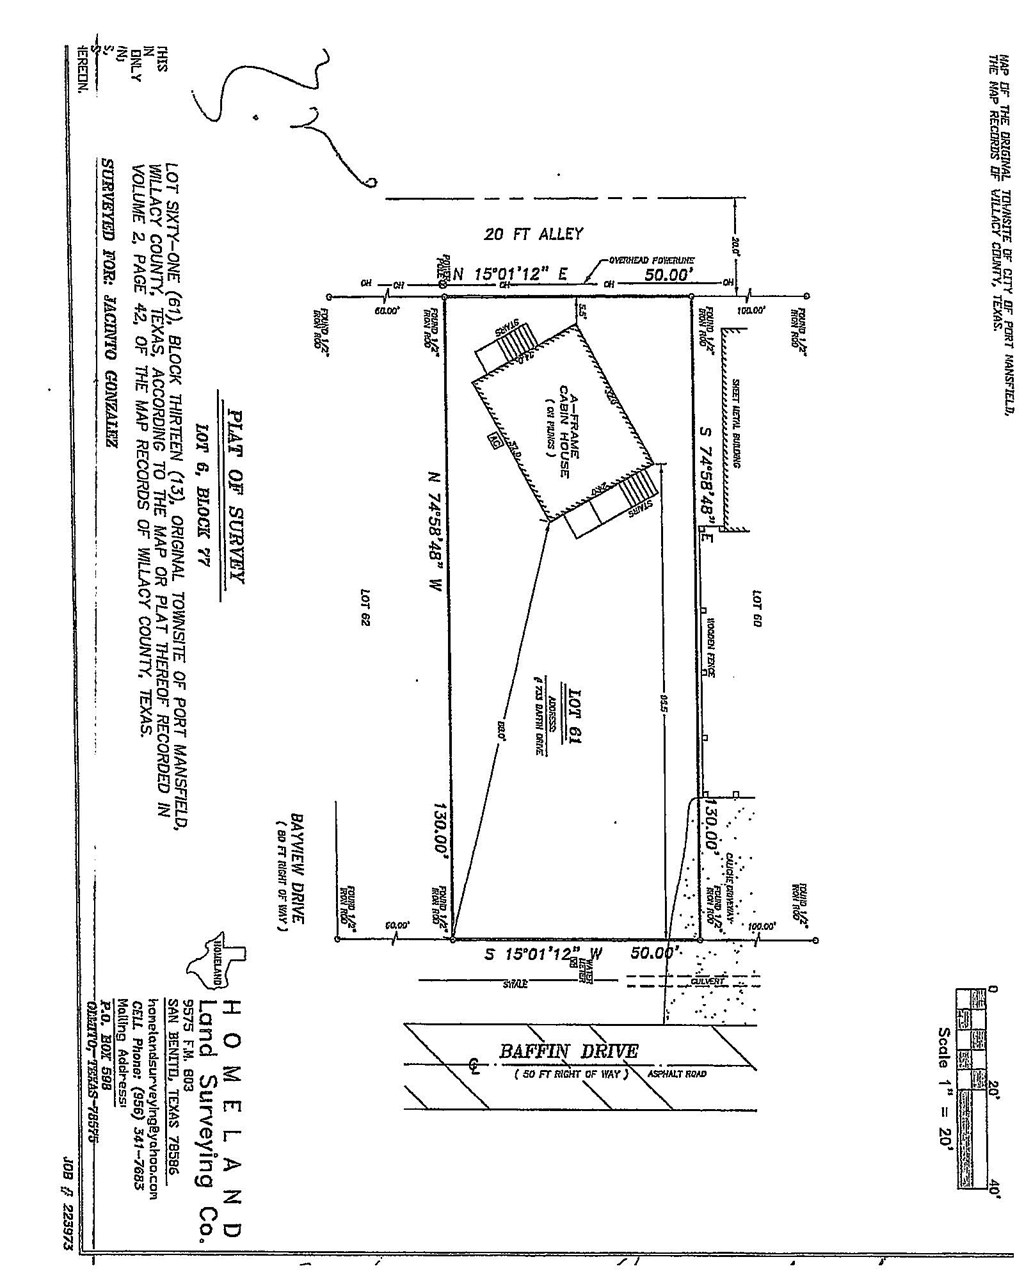 drawn survey of the property